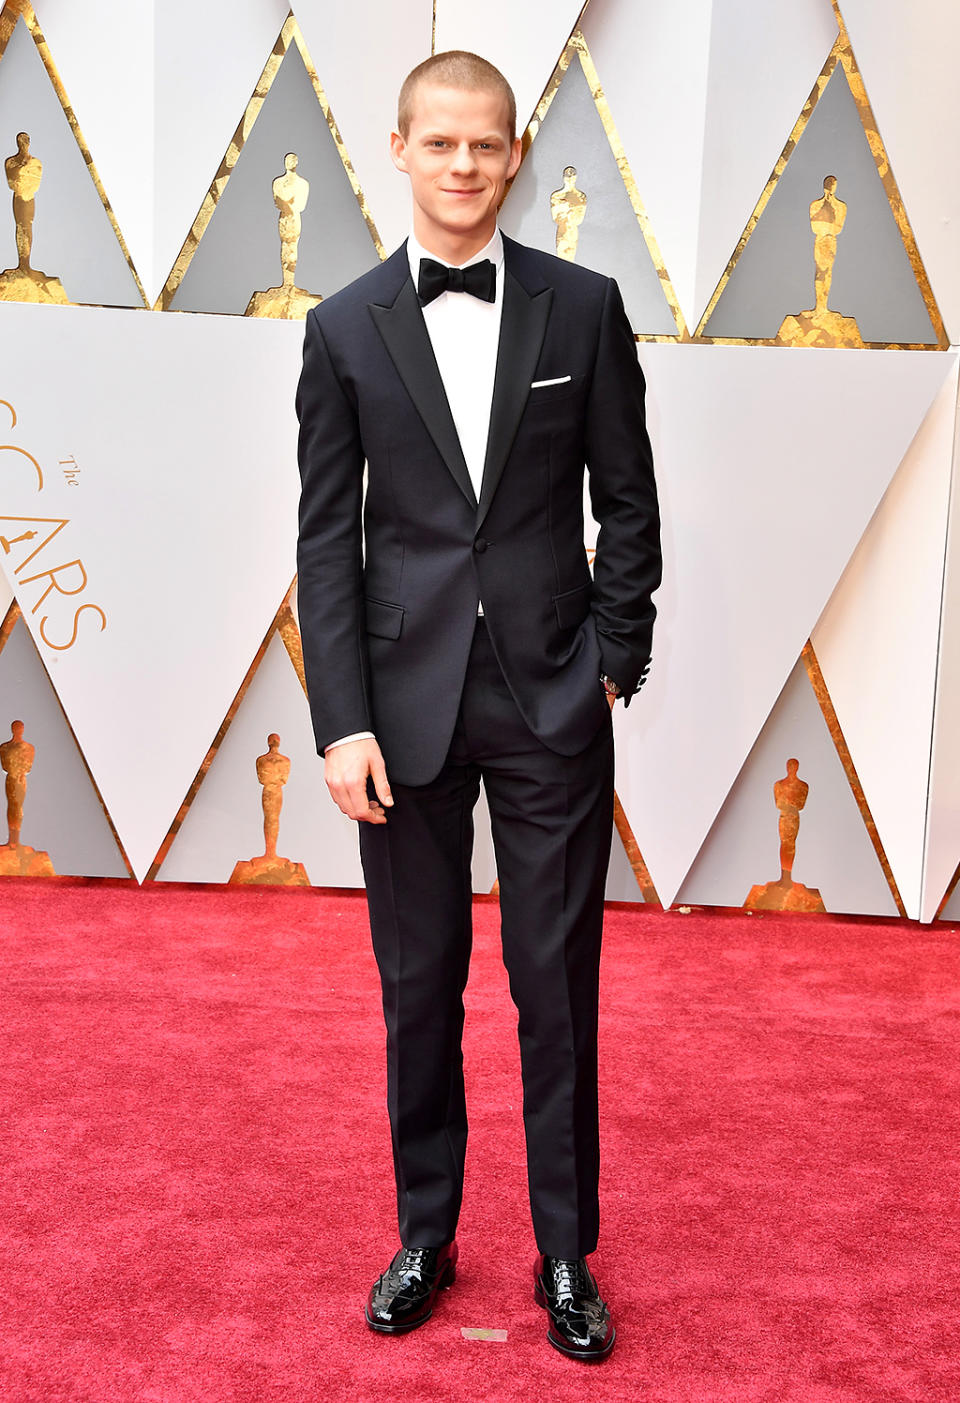 <p>Actor Lucas Hedges attends the 89th Annual Academy Awards at Hollywood & Highland Center on February 26, 2017 in Hollywood, California. (Photo by Steve Granitz/WireImage) </p>